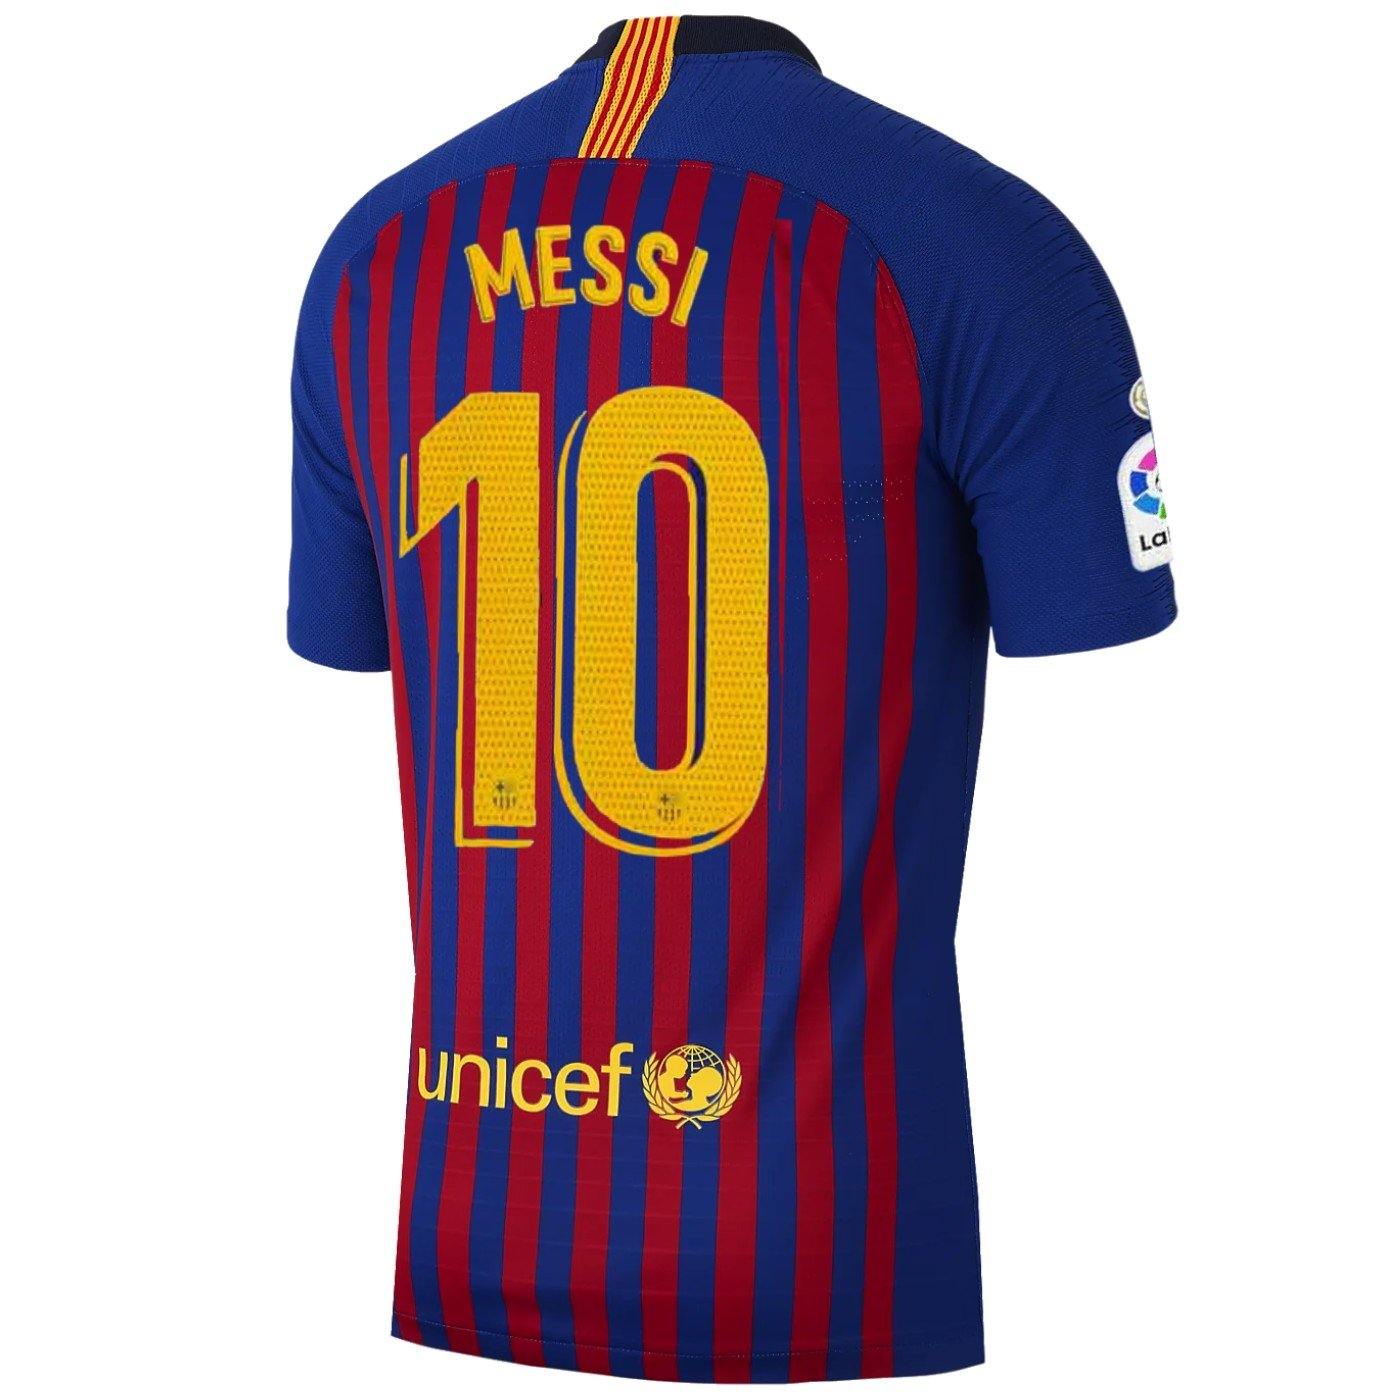 FC Barcelona Messi 10 Player Issue soccer jersey - Nike